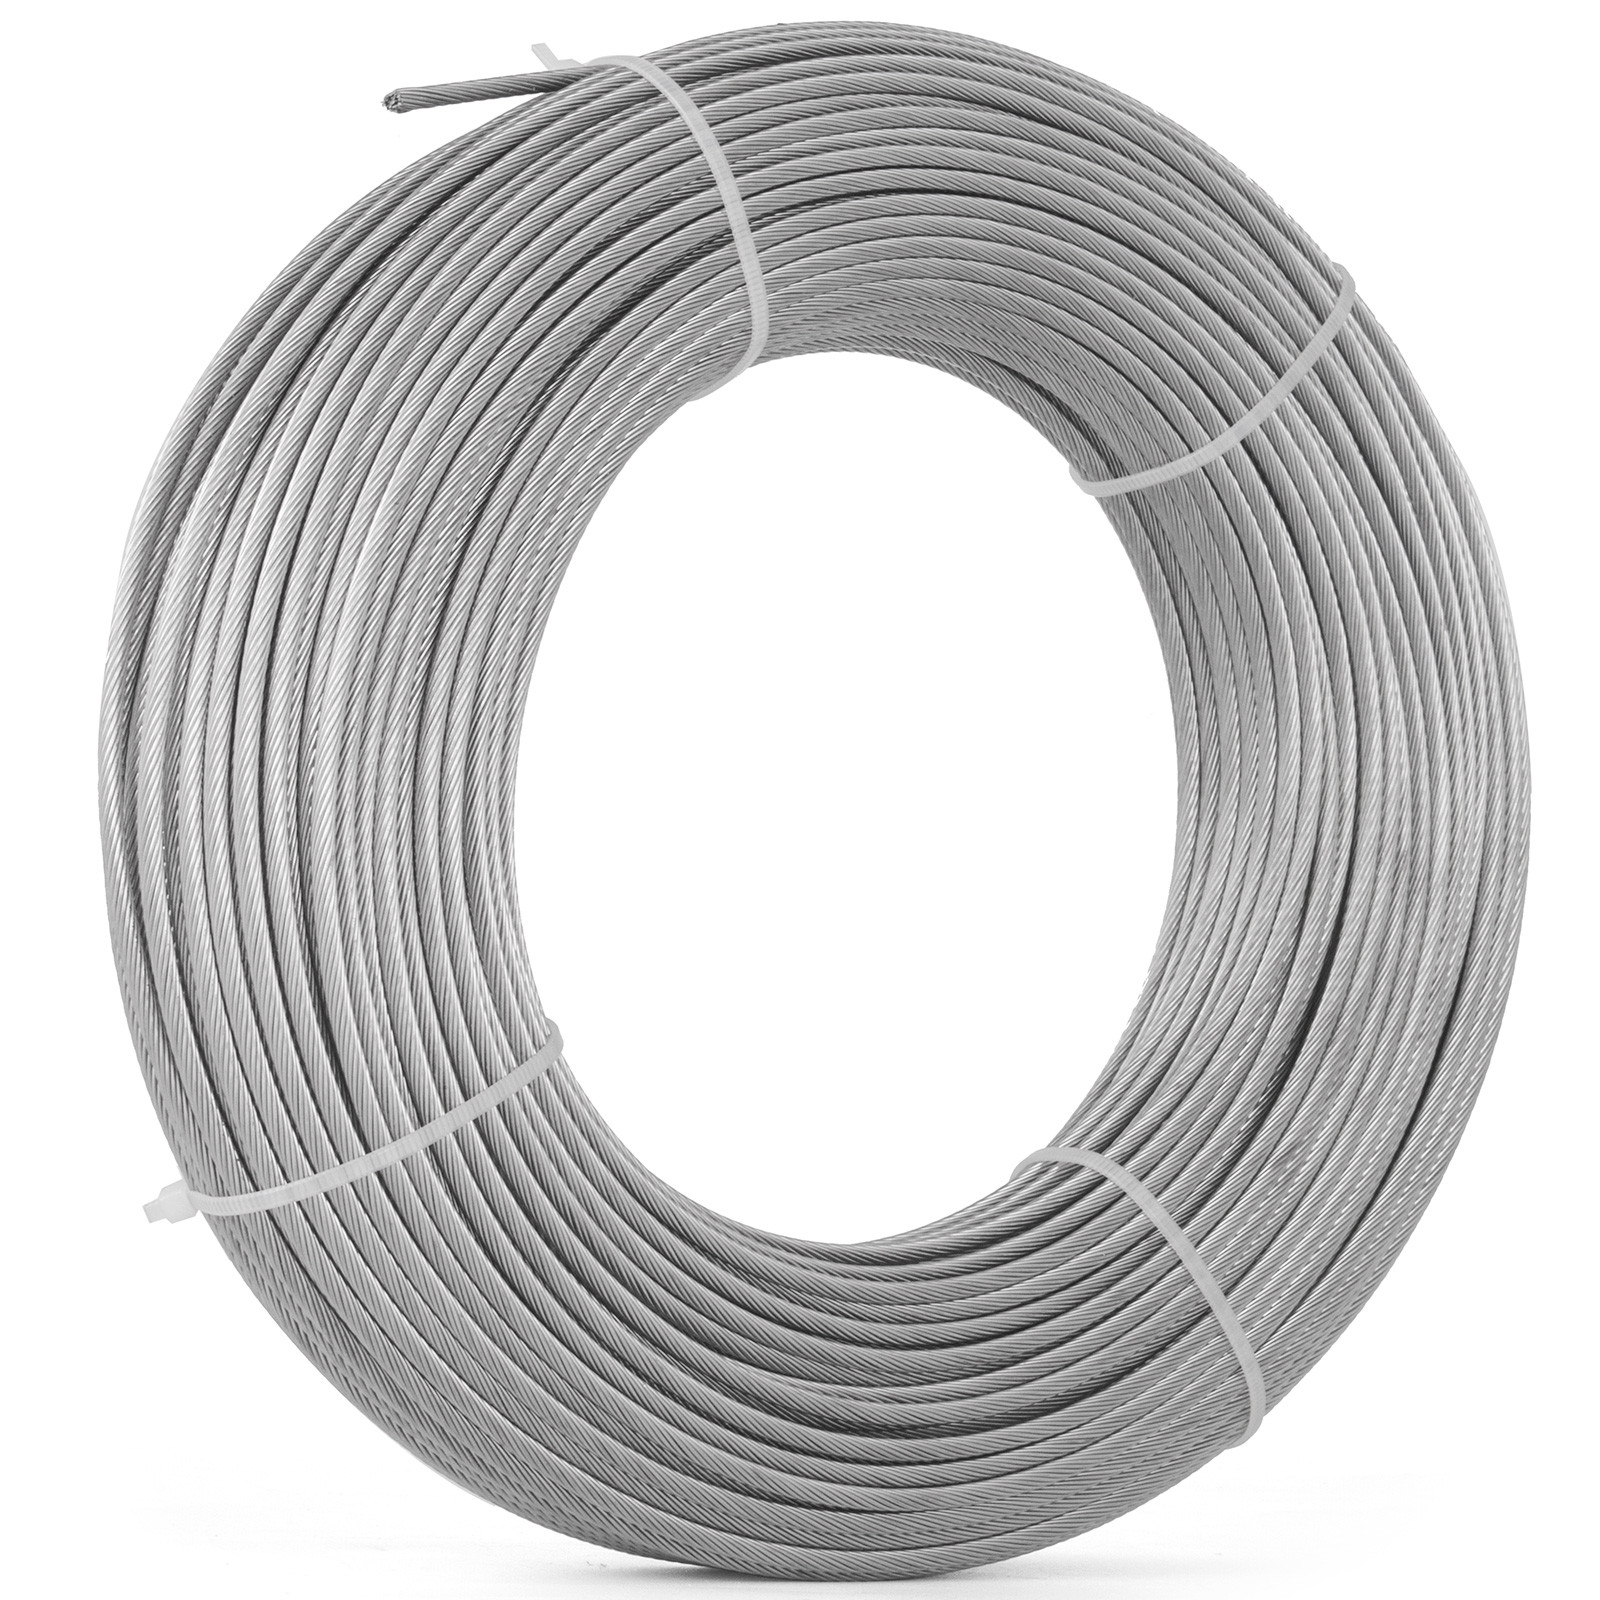 VEVOR T316 1x19 Stainless Steel Cable Wire Rope 100,200,400,500,1000FT 1x19 Stainless Steel Wire Rope